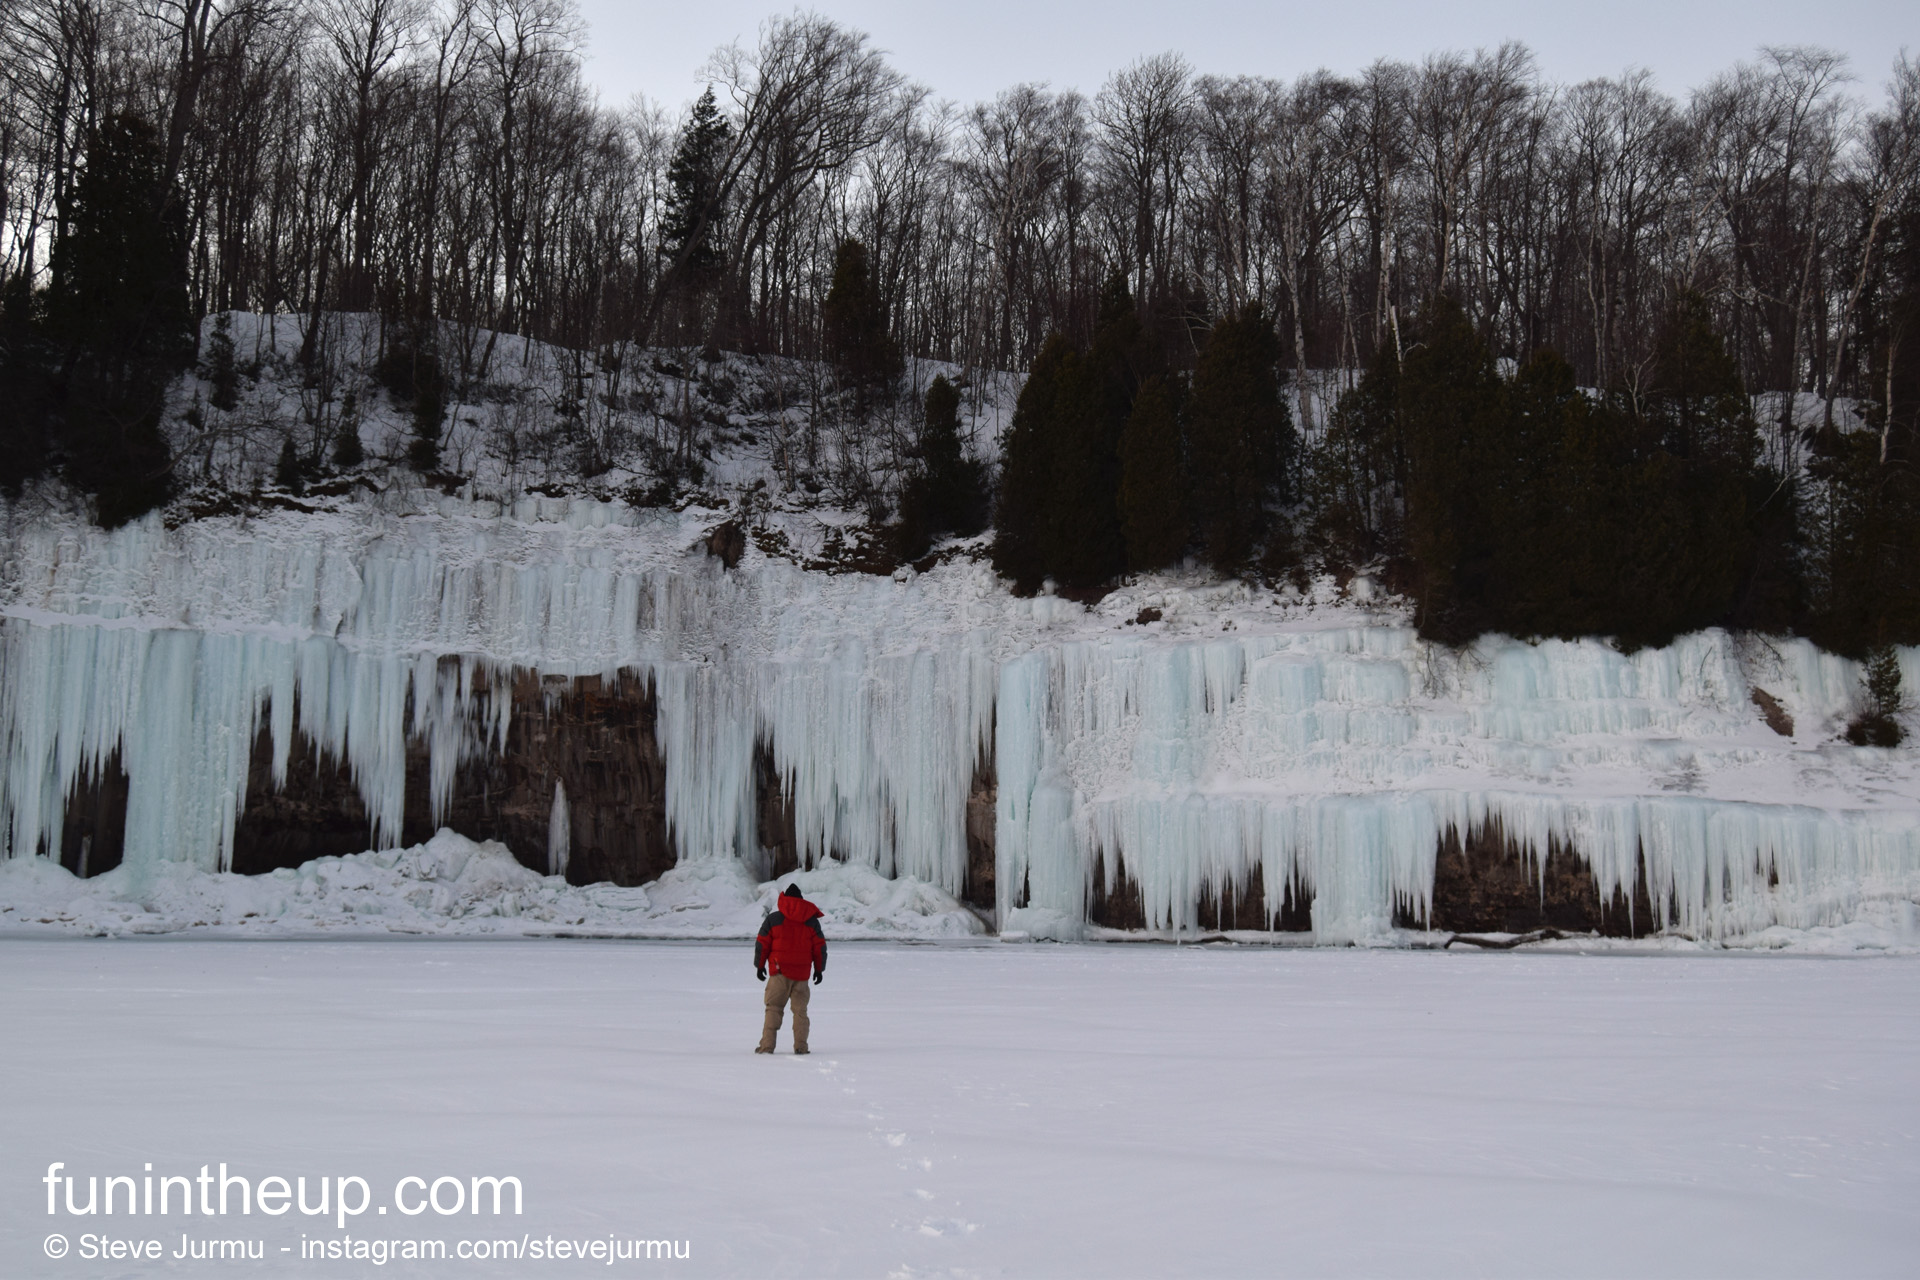 Grand Island ice caves, pictured rocks, winter ice caves